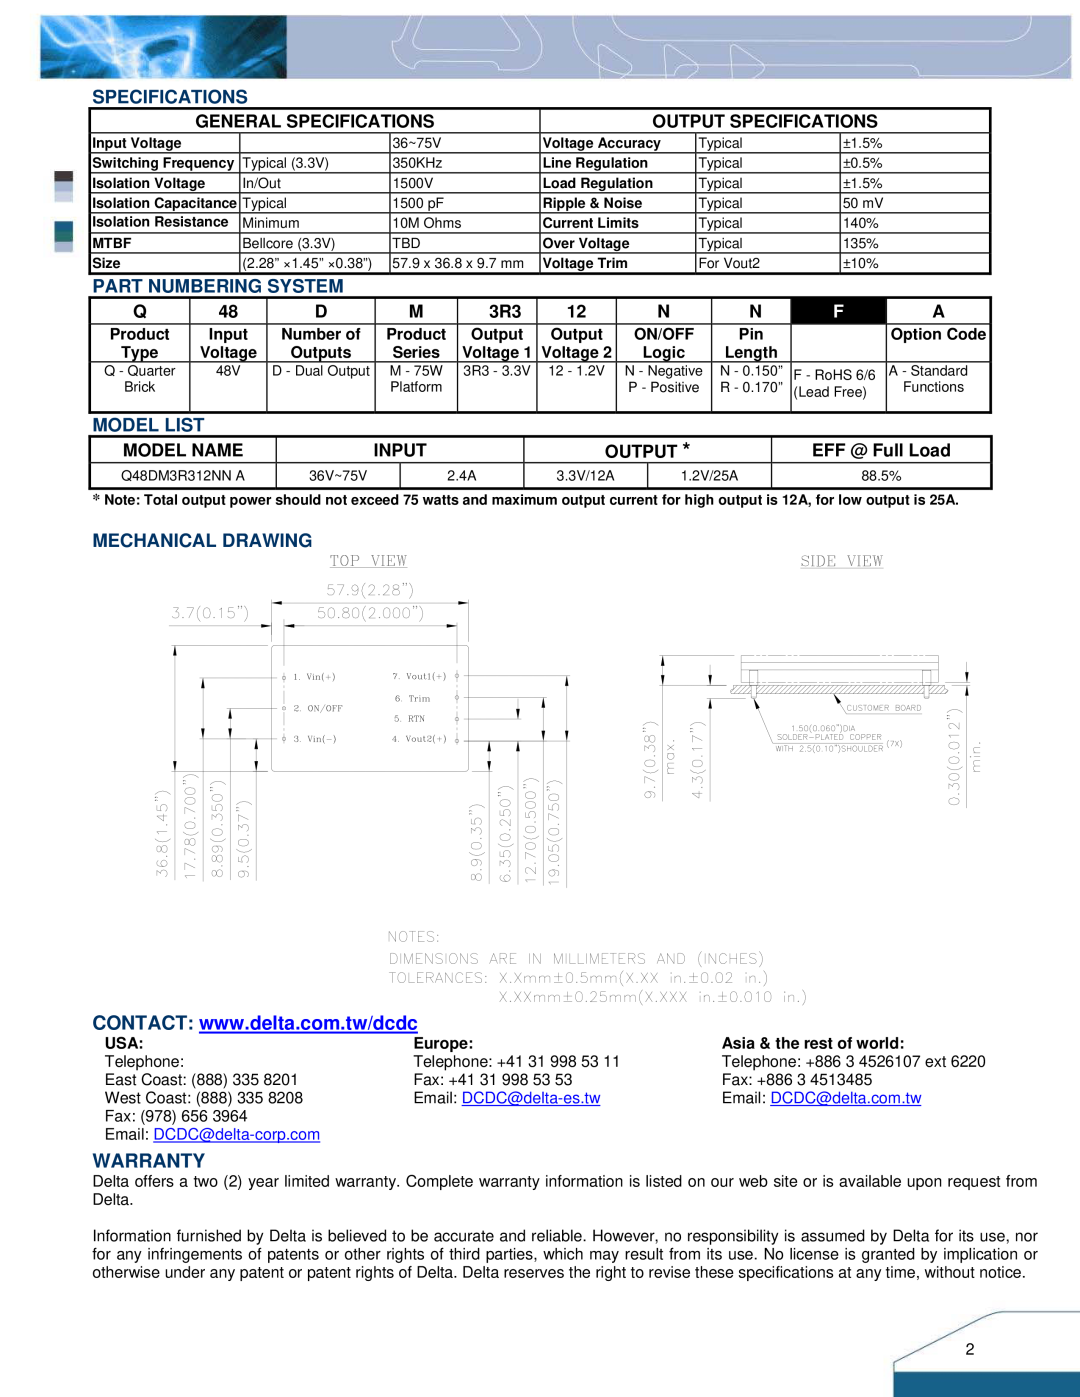 Delta Electronics Q48DM Warranty, System, Model List, Mechanical Drawing, General Specifications, Model Name, Input 